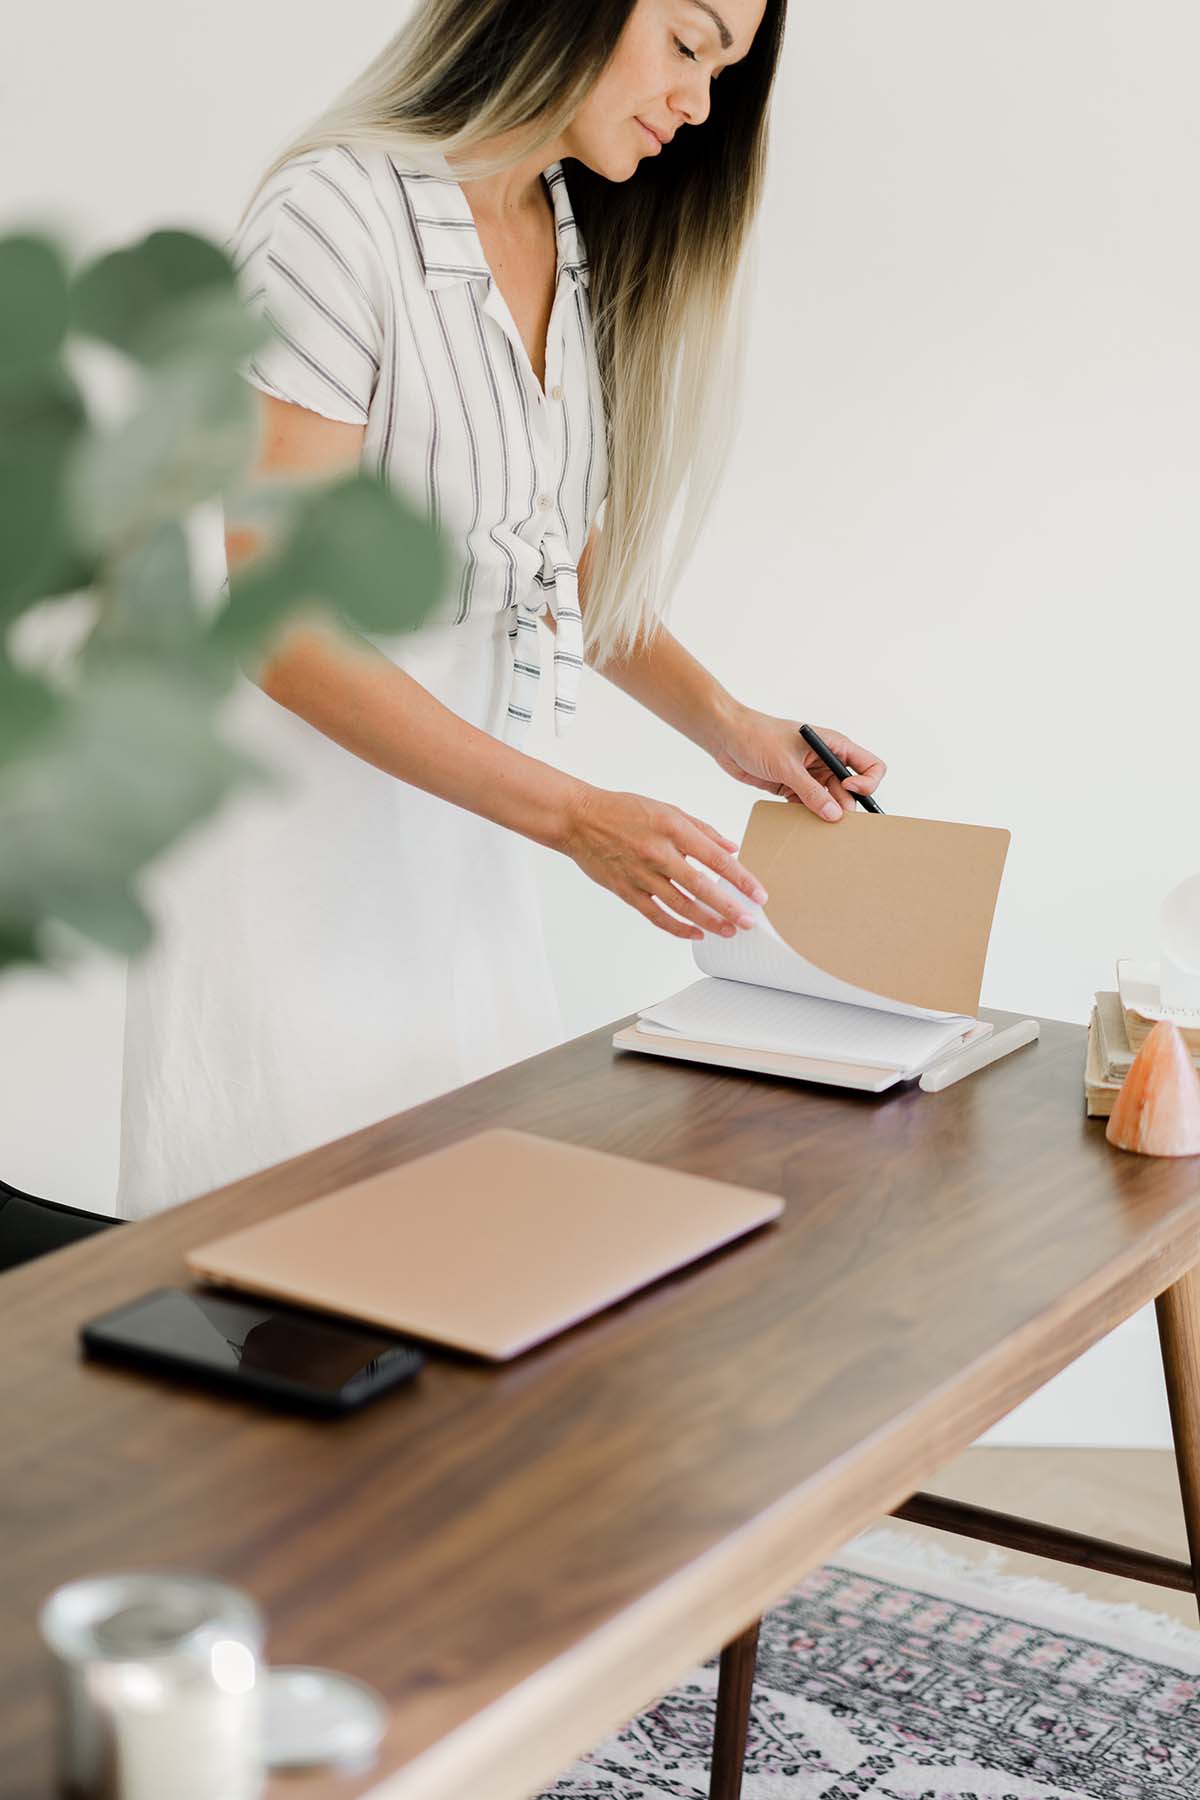 Feeling disorganized in your day? You're not the only one! Here's 3 super simple ways you can be more organized in your day, get more done, and feel less overwhelmed. 